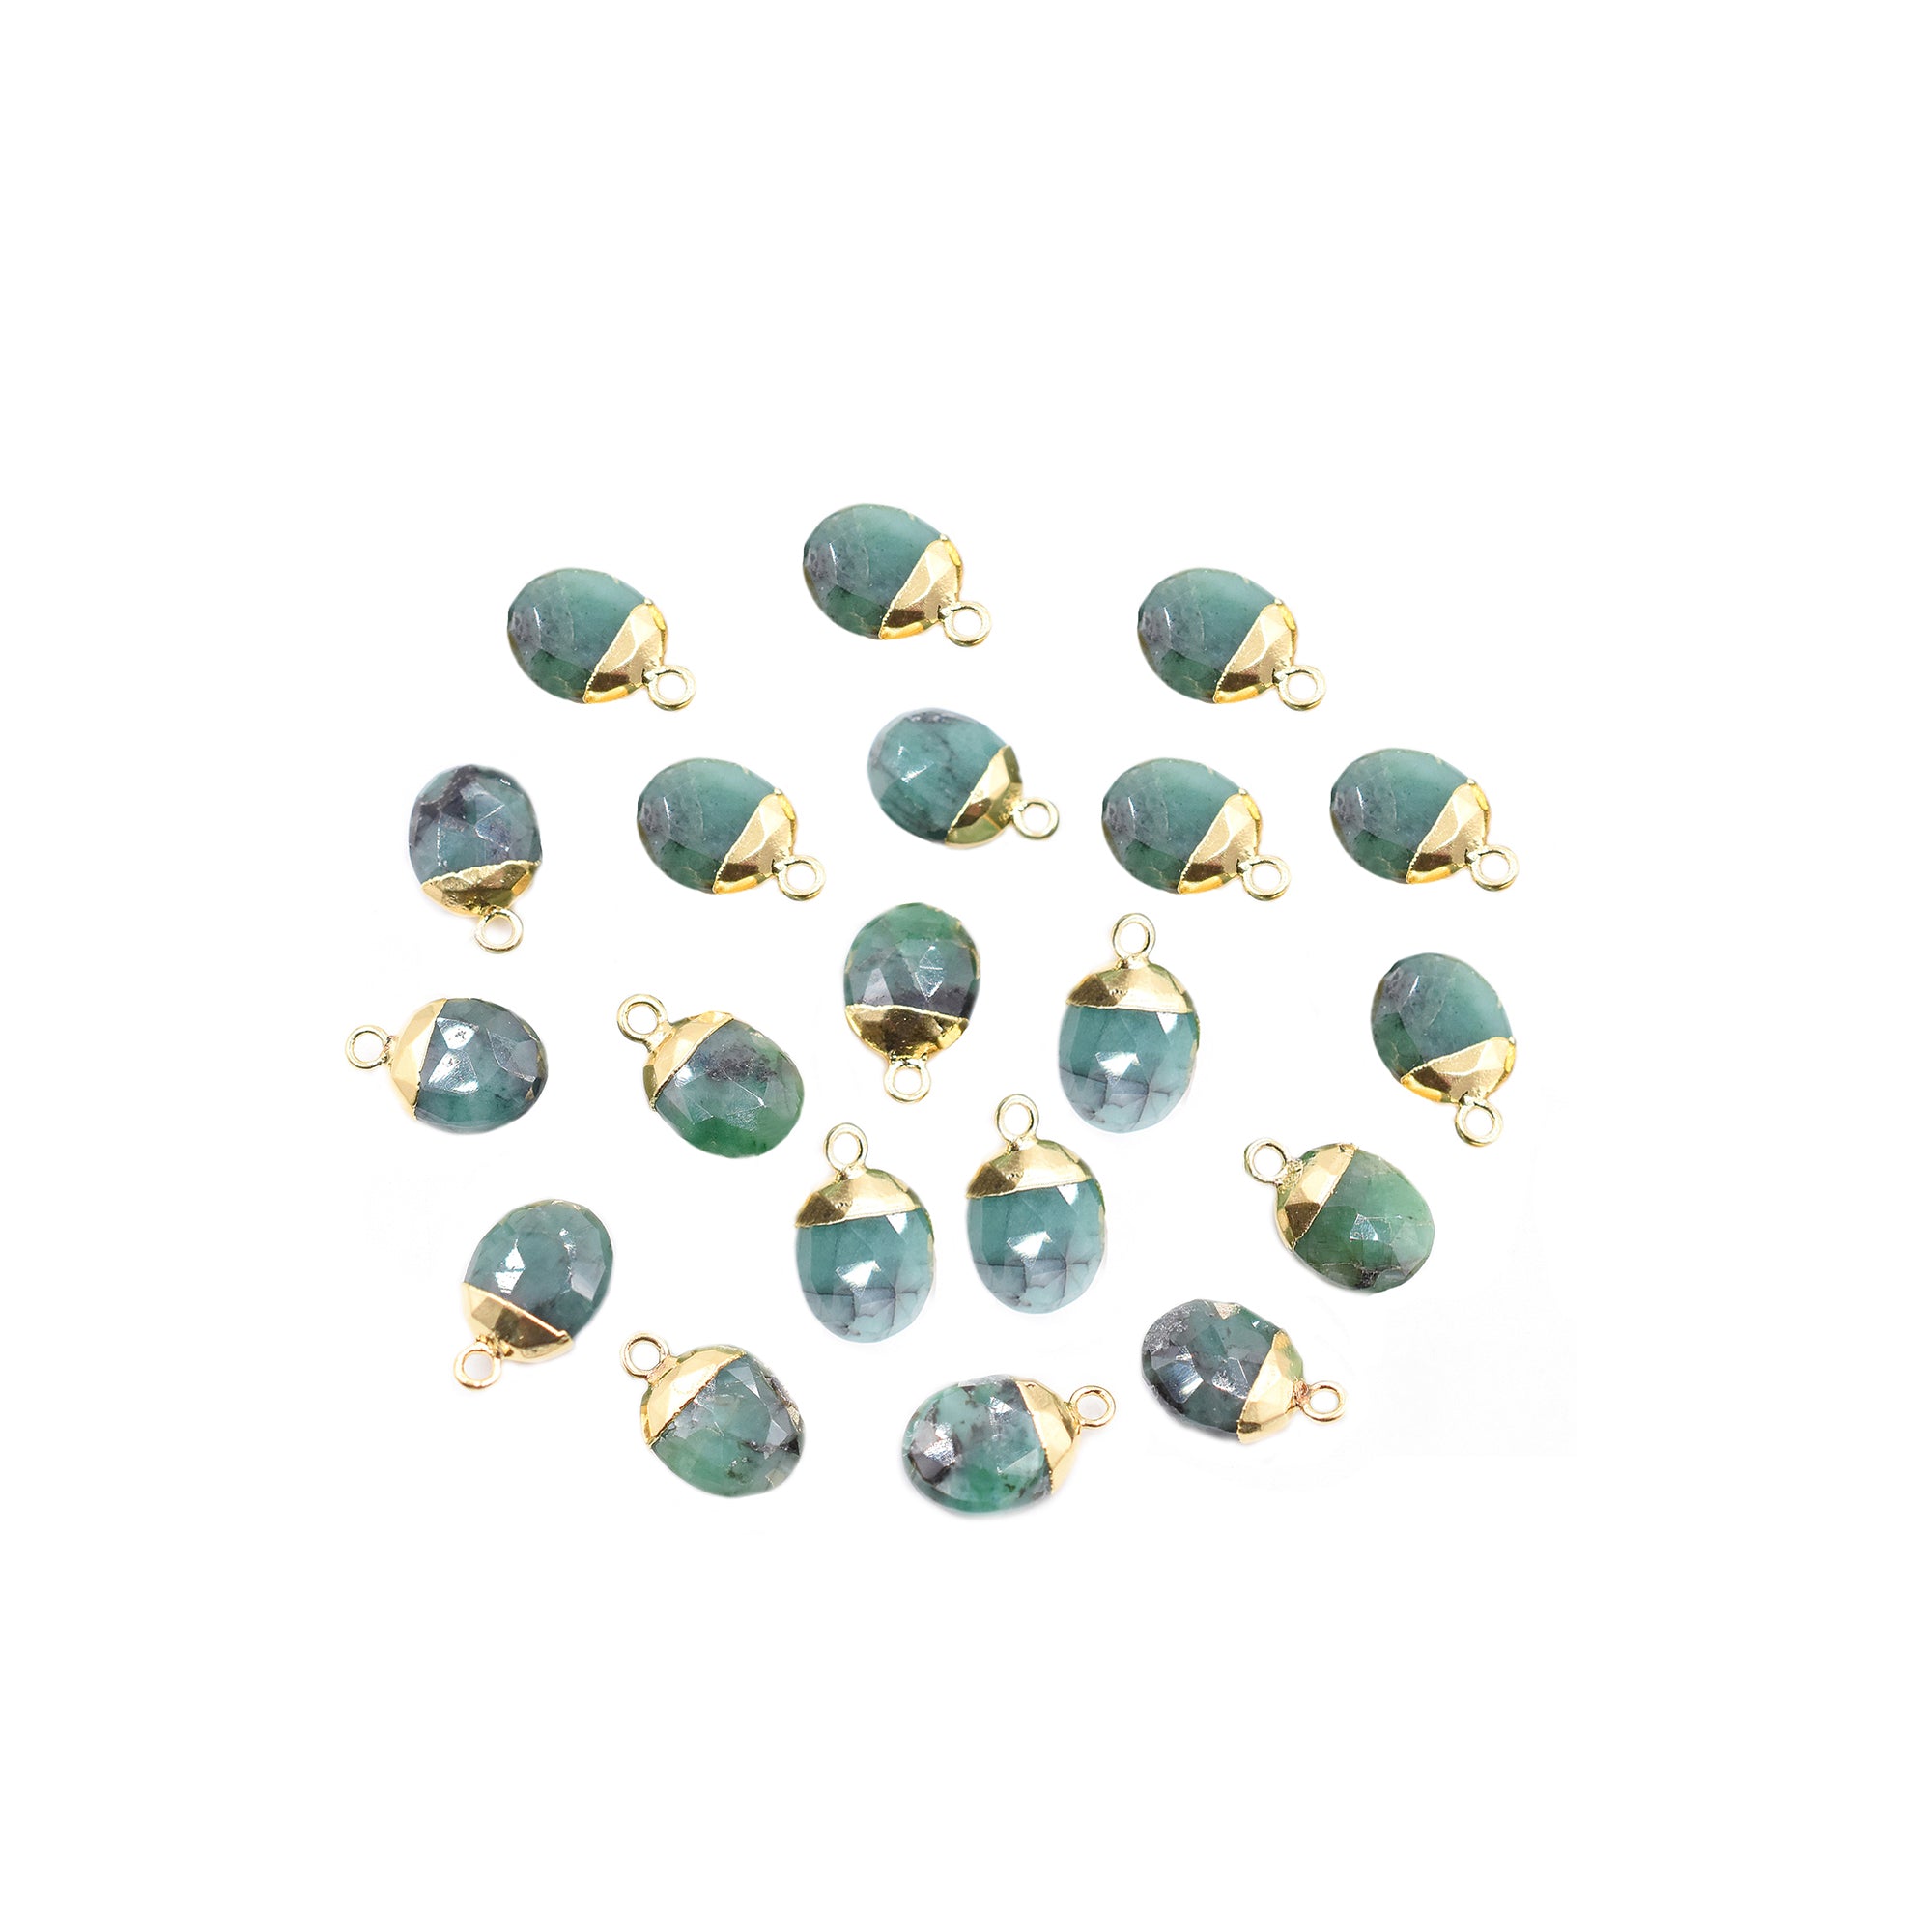 Raw Emerald 10X8 MM Oval Shape Gold Electroplated Pendant (Set Of 2 Pcs)